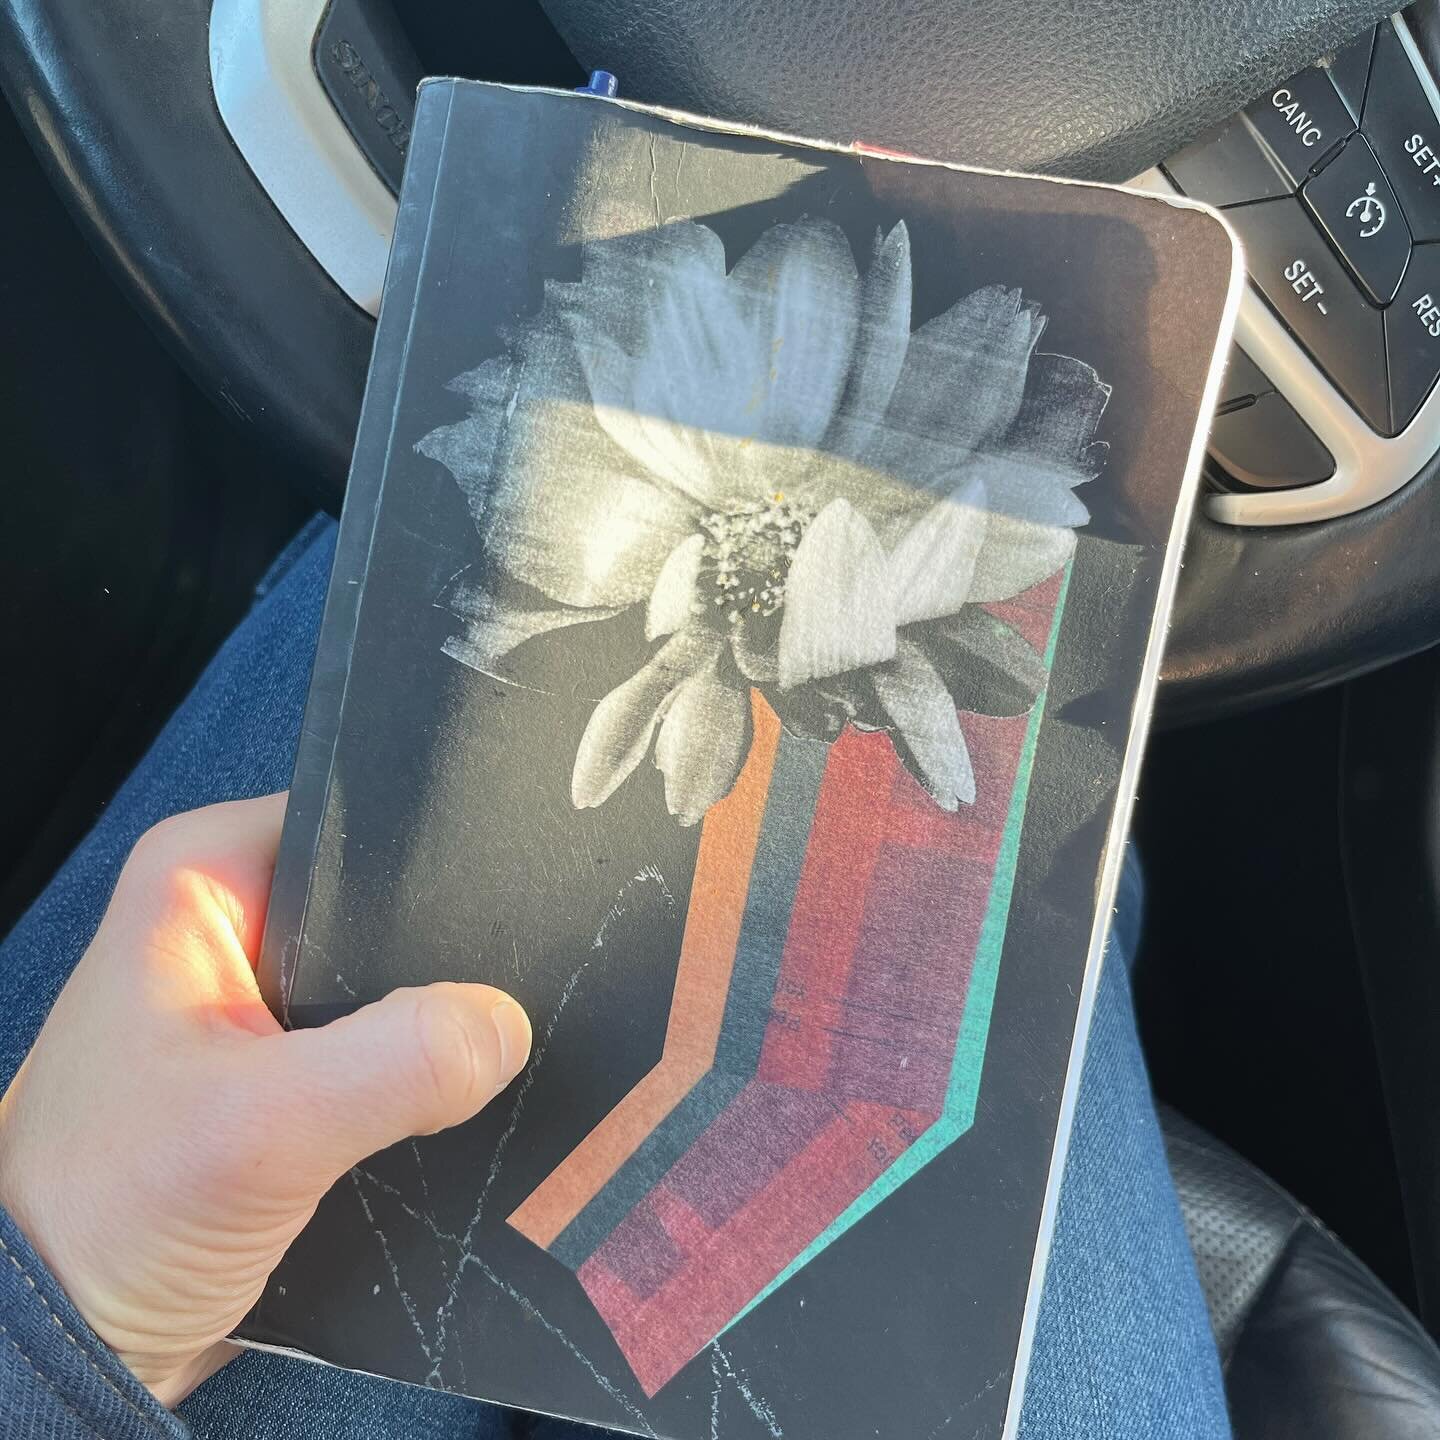 Writing my gratitudes in the grocery store parking lot❤️
.
#gratitudepractice #grateful #journal #notebook #morningpages